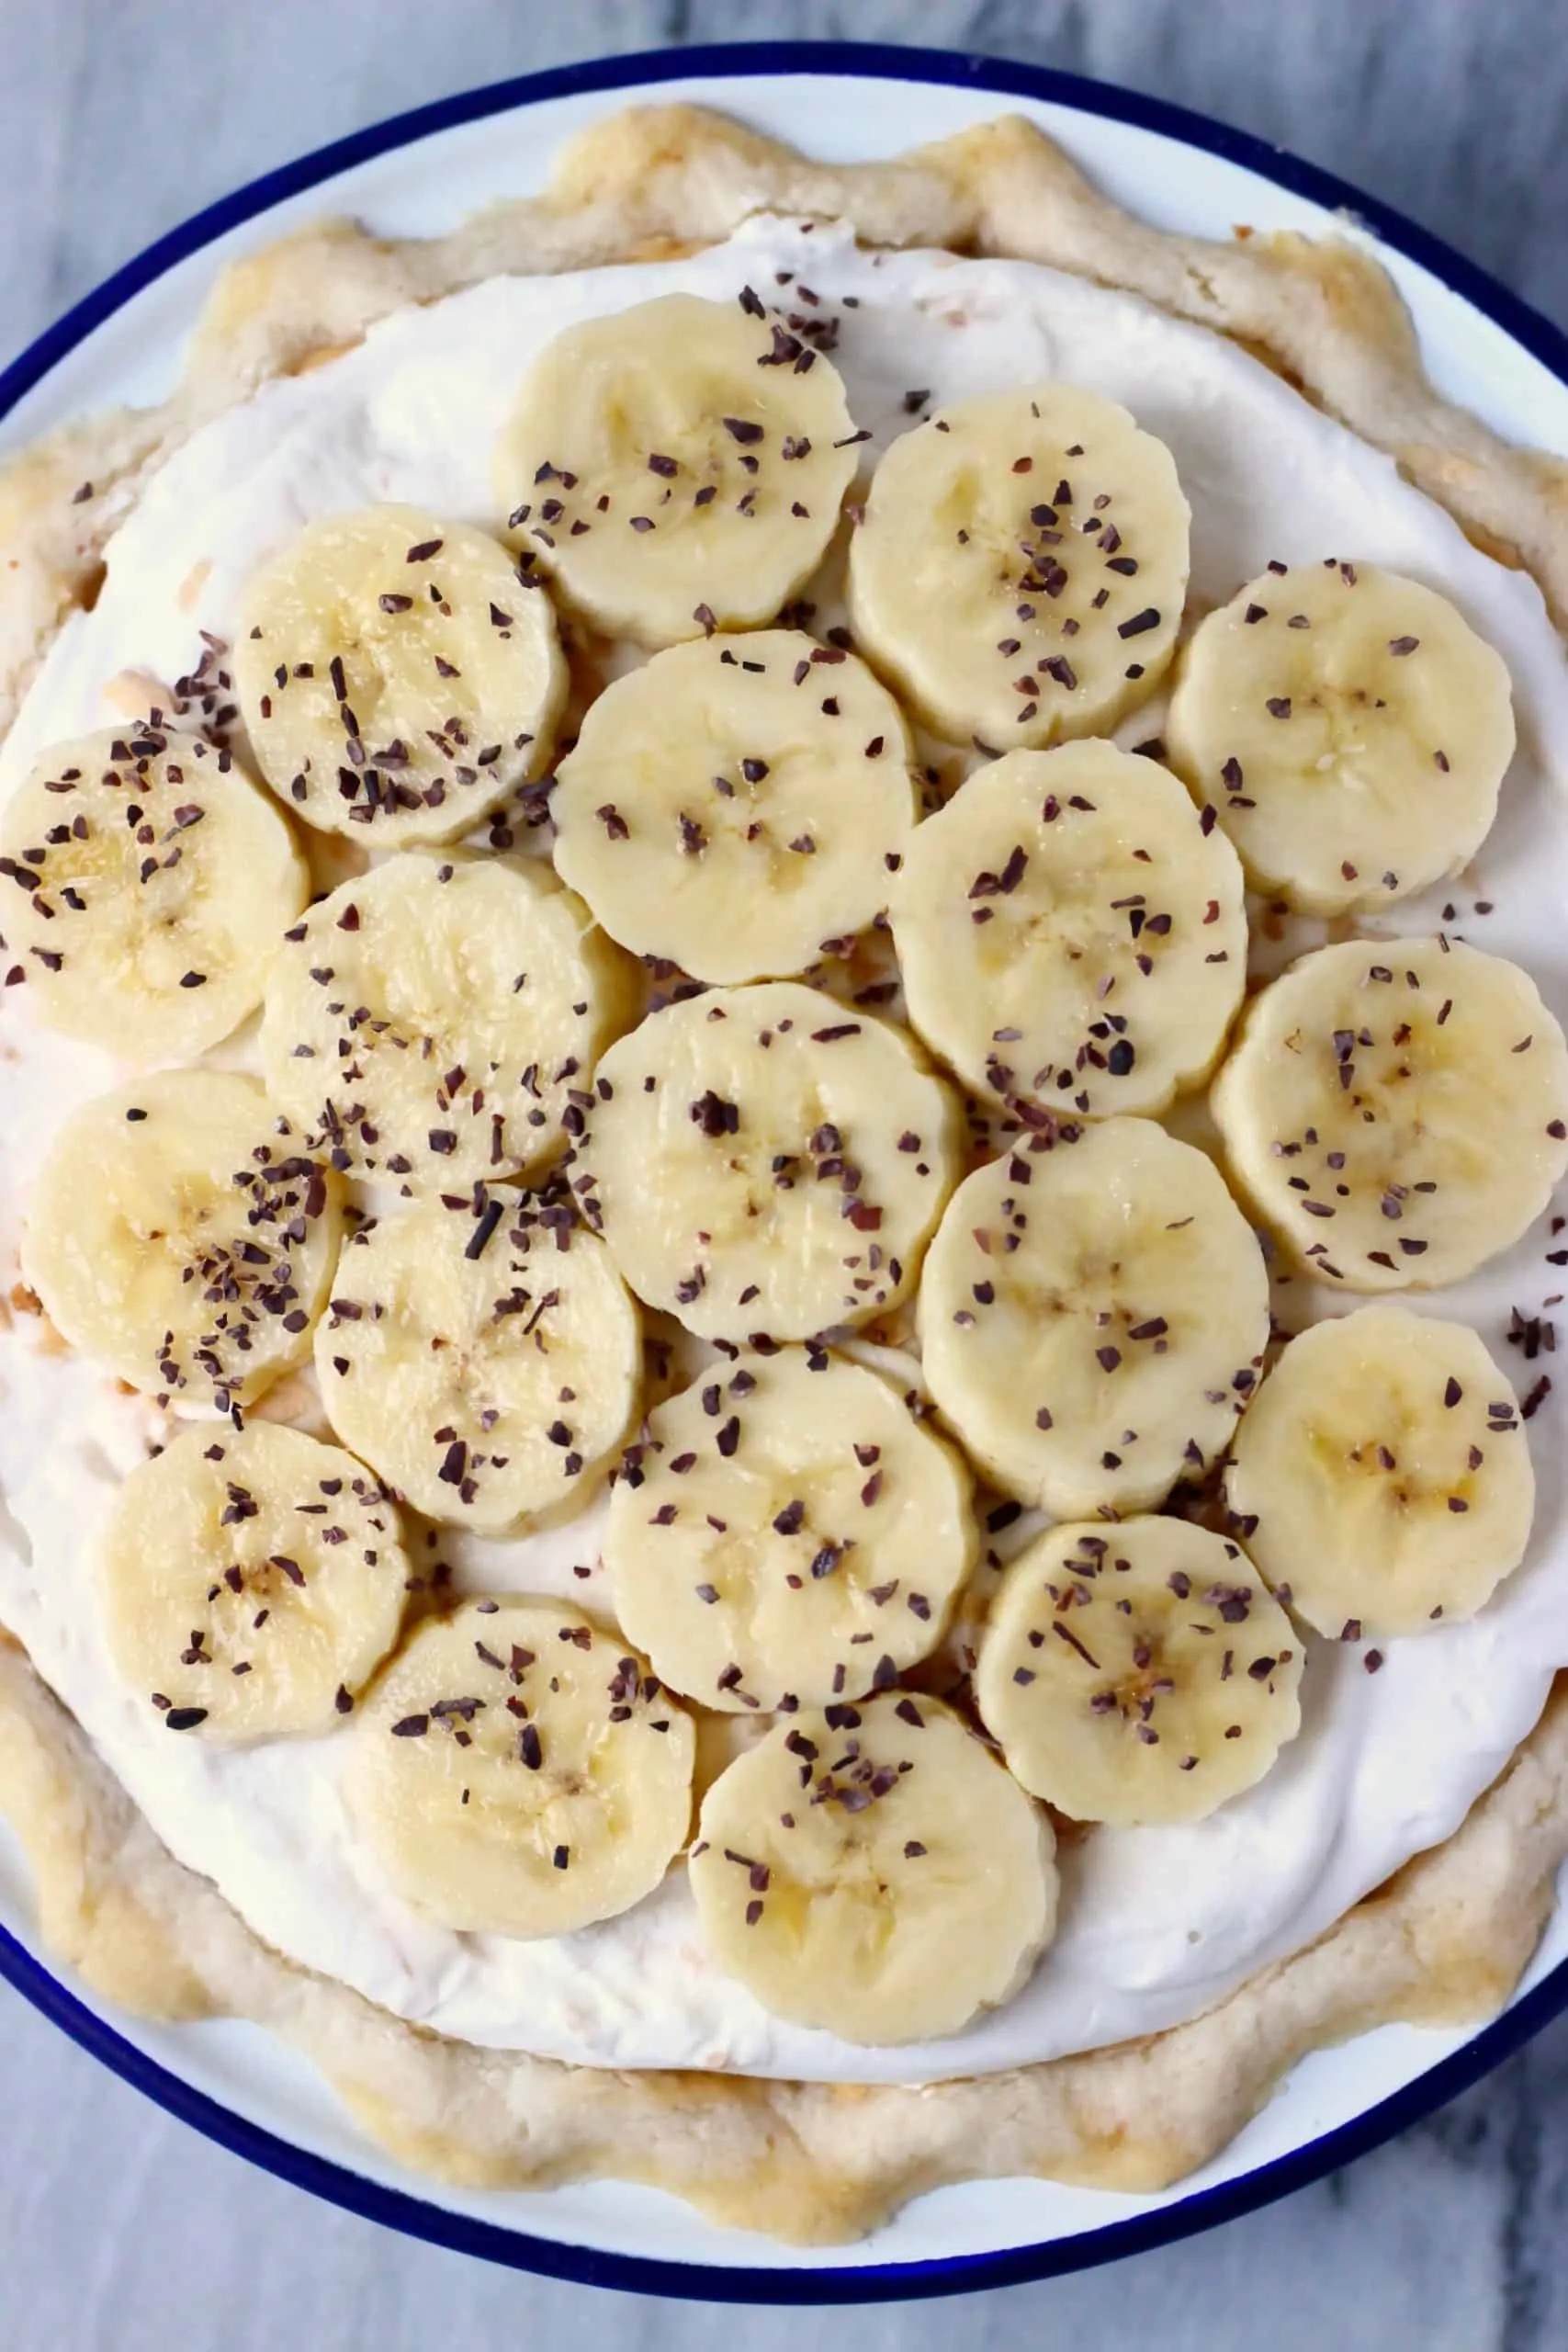 Gluten-free vegan banana cream pie topped with cream and sliced bananas in a white pie dish